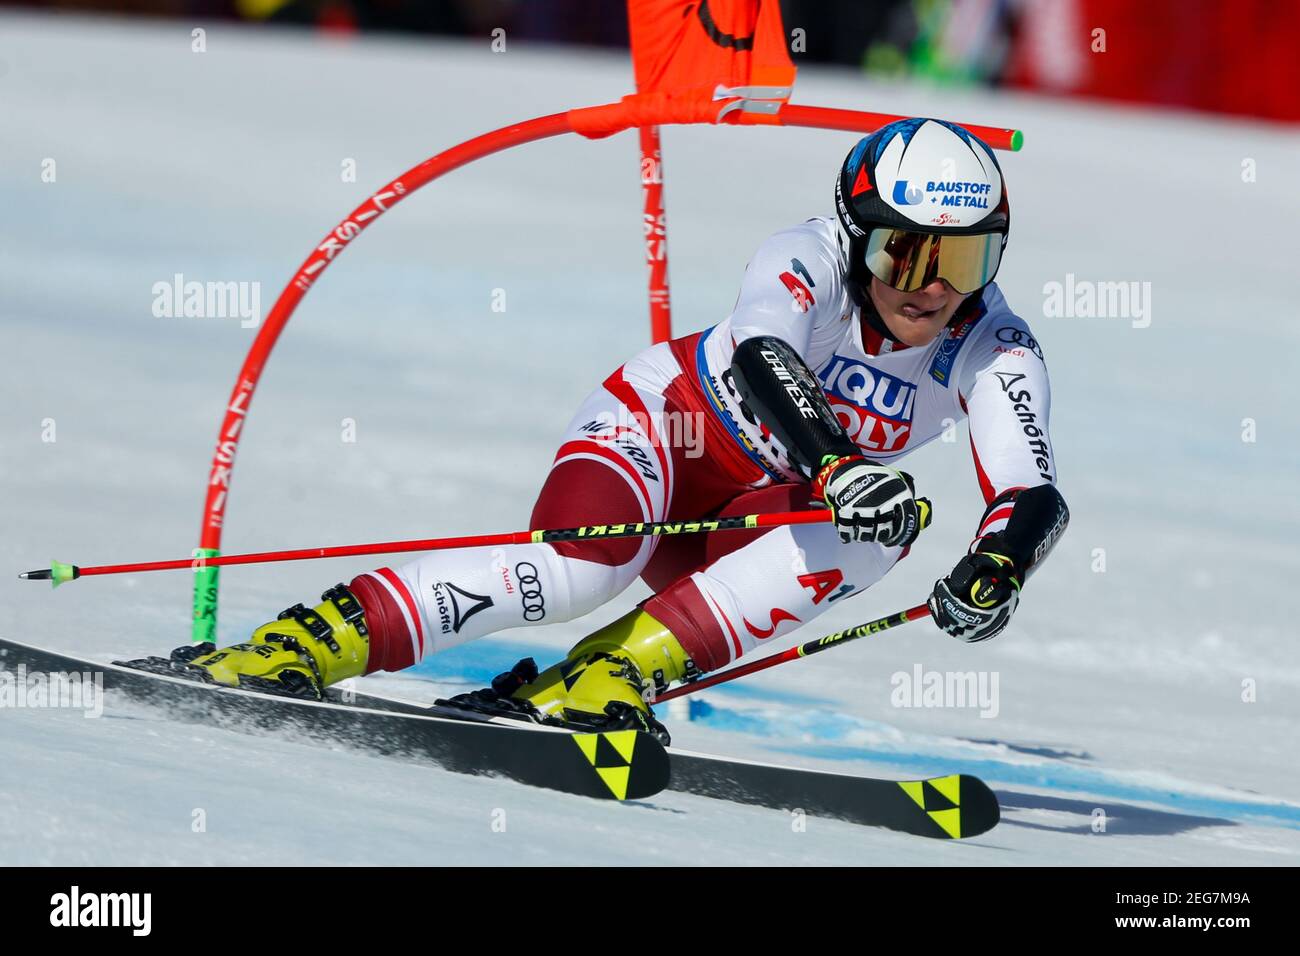 Olympia delle Tofane, Cortina (BL), Italy, 18 Feb 2021, Ramona Siebenhofer  (AUT) holds the 14th place after the first run during 2021 FIS Alpine World  SKI Championships - Giant Slalom - Women,